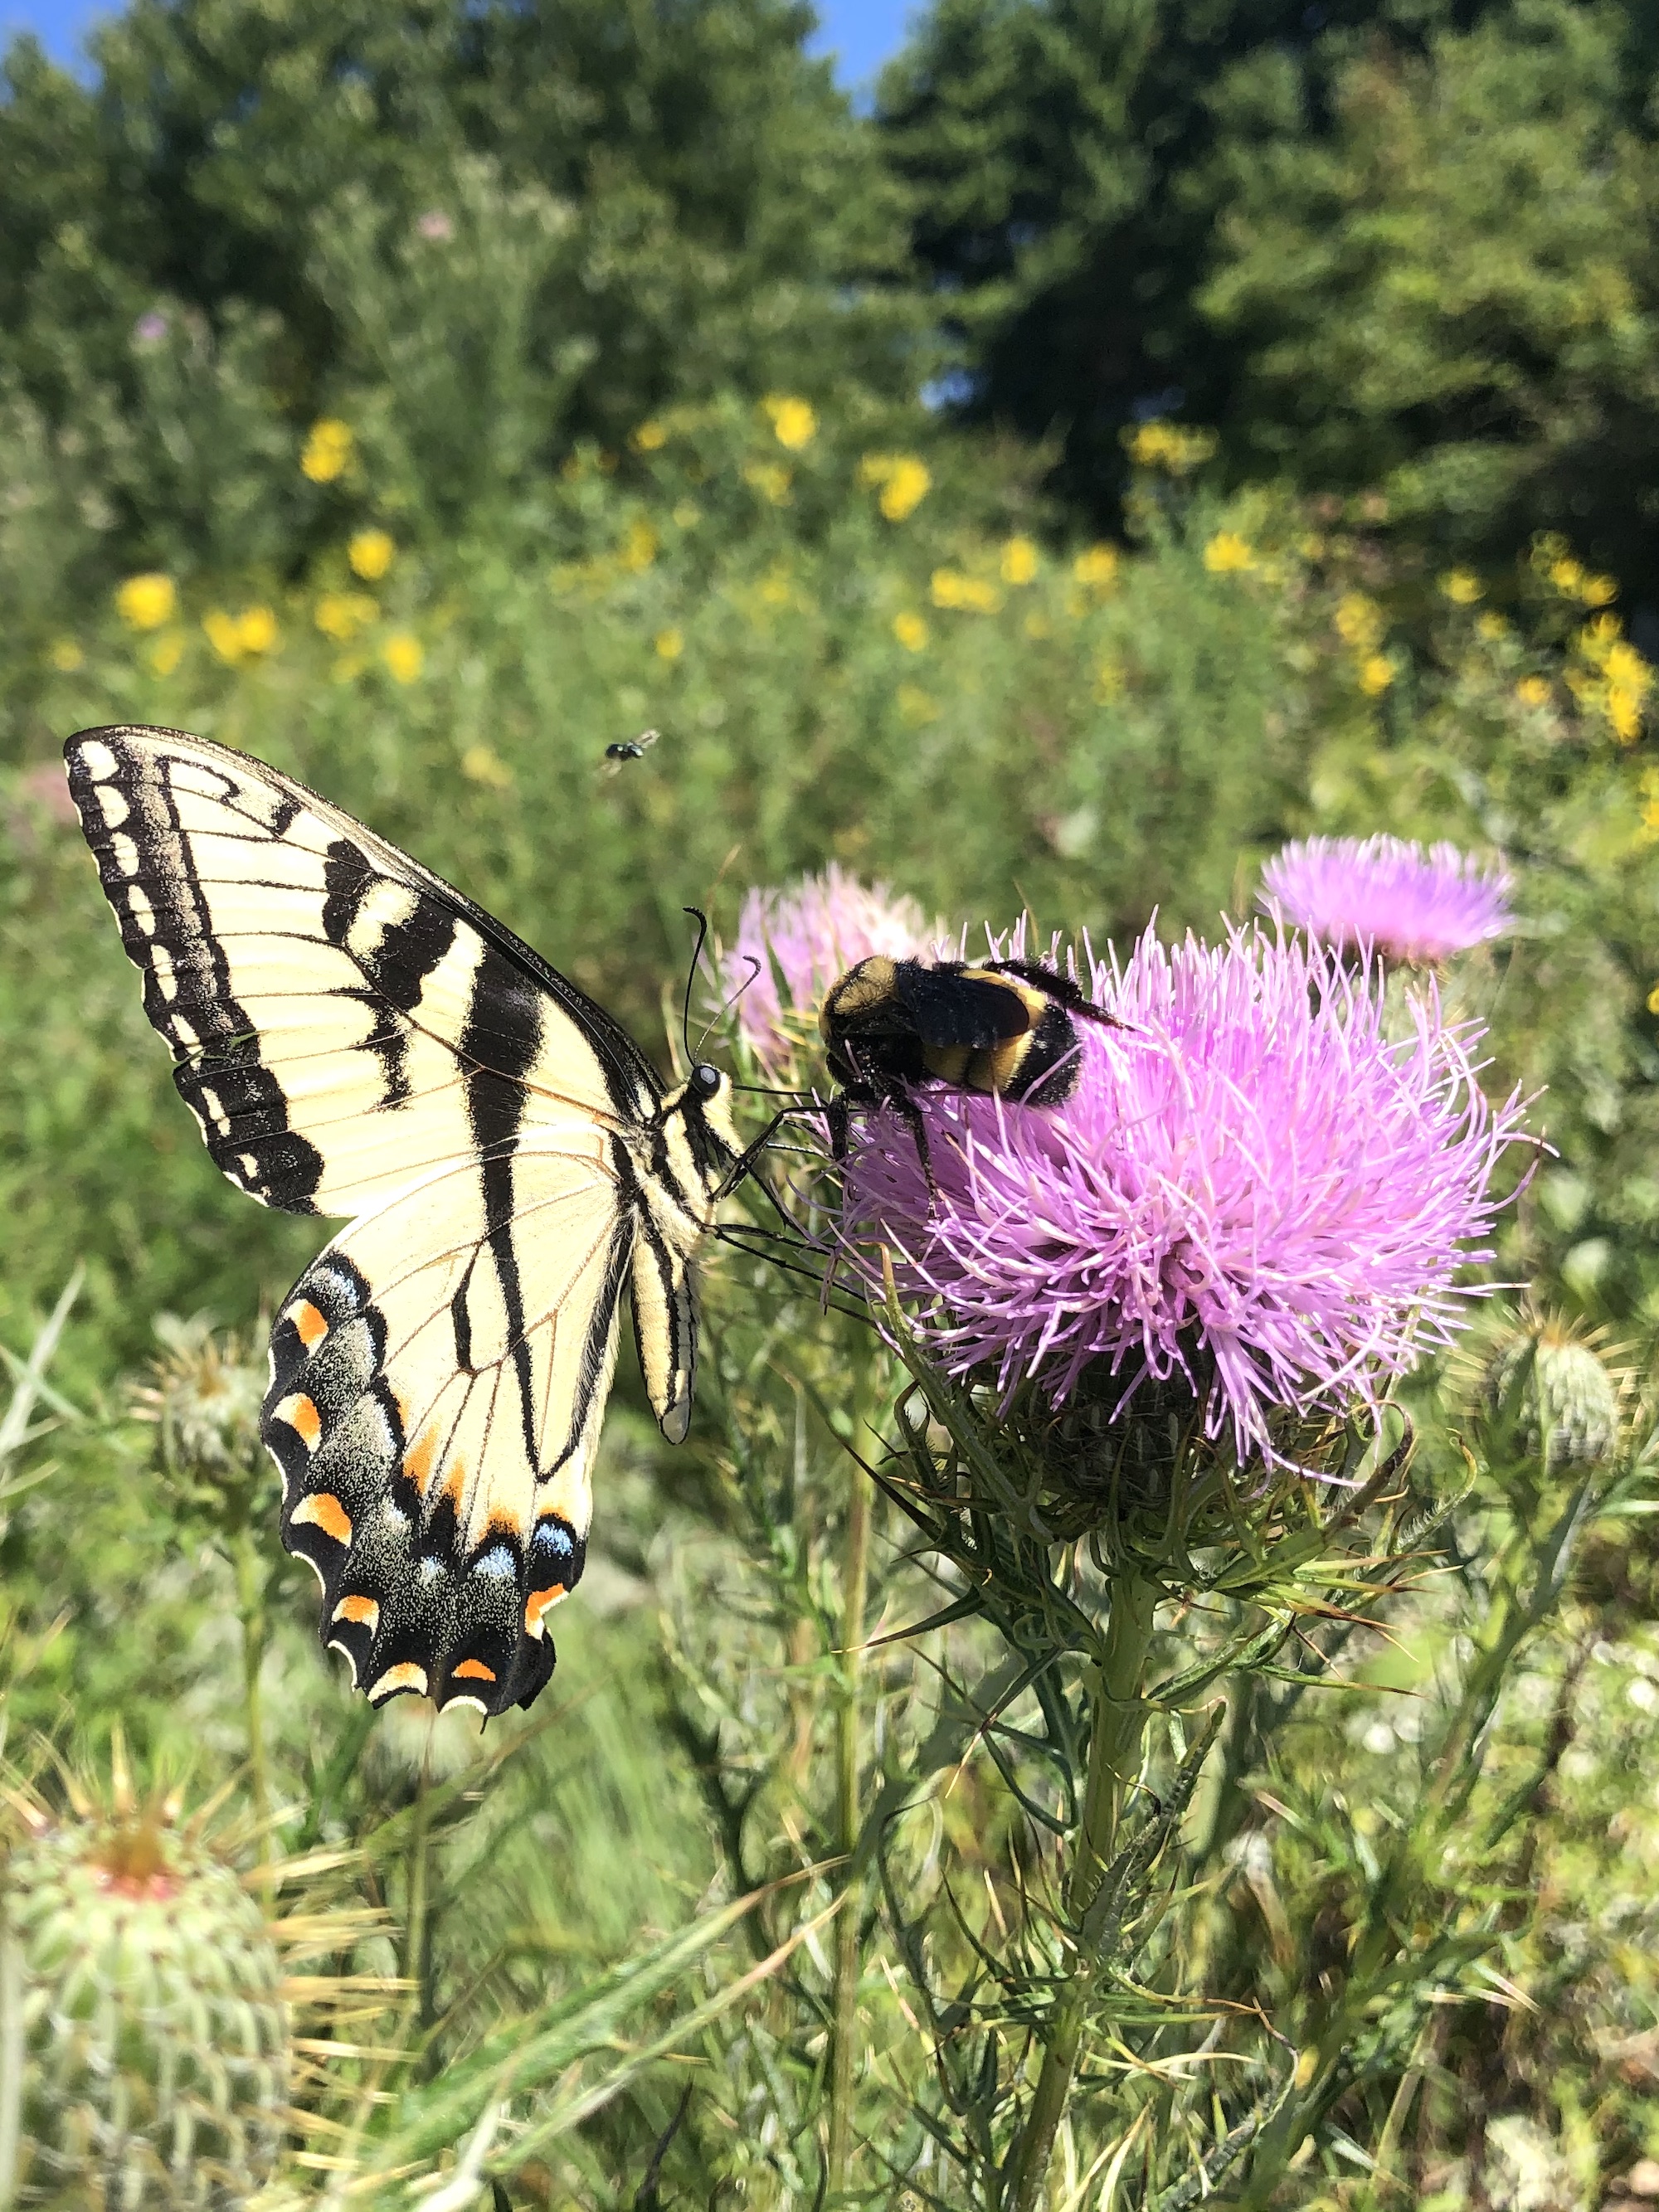 Eastern Swallowtail butterfly on Field Thistle near the Arborteum Visitor's Center in Madison, Wisconsin on August 16, 2020.